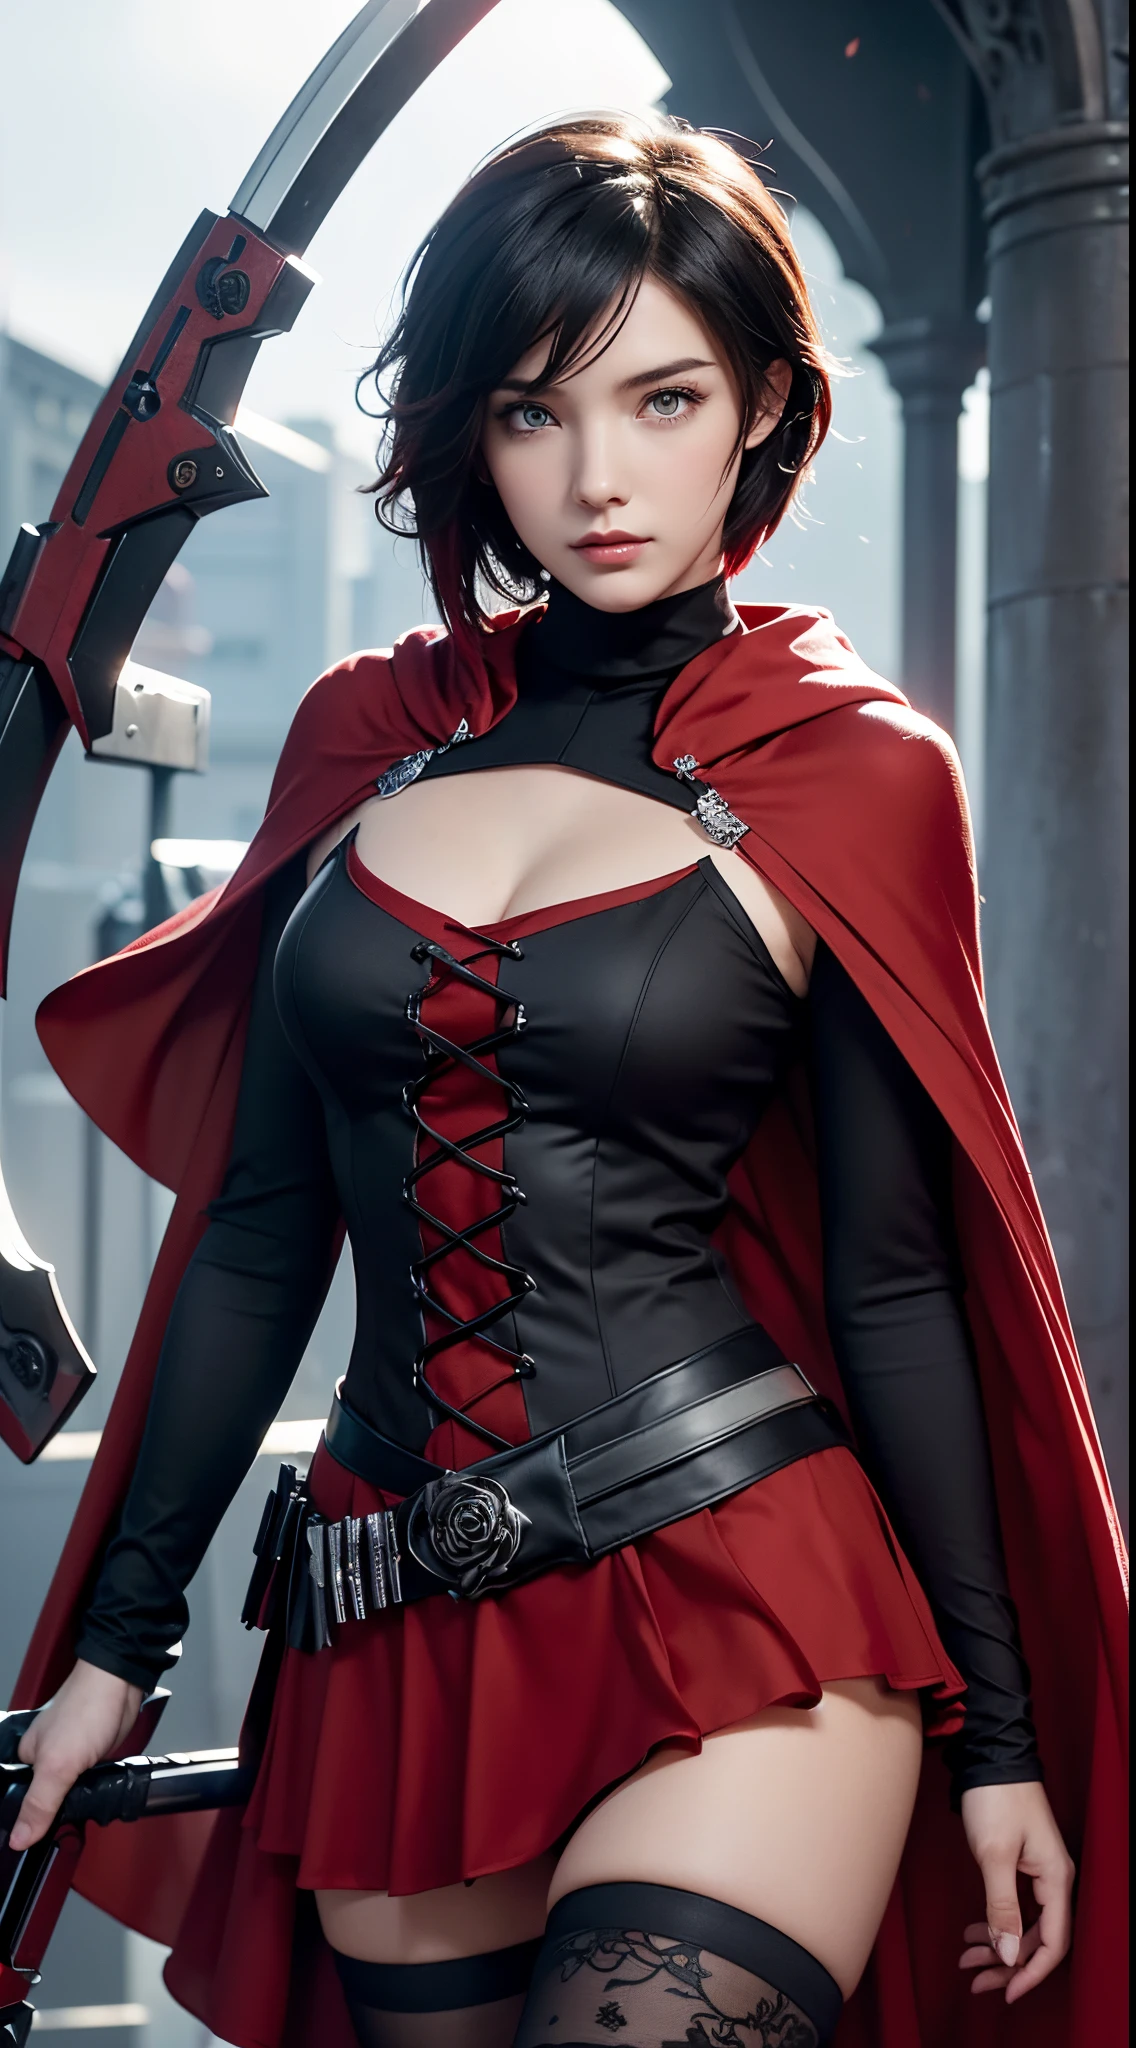 ruby rose (\rwby\), brunette, 1 girl, best quality, high-detailed, masterpiece, high definition, Sharp: 1.2, Perfect body beauty: 1.4, Slim abs: 1.2, ((Layered Hair Style,)), Highly detailed face and skin texture, Detailed eyes, Double eyelids, Looking at the camera, silver eyes, long hair, night background, perfect lighting,(bright), hyperrealism, thighhighs, rwby, red scythe, red cloak, silver rose brooch, short hair, teenager, black-red gothic dress, rose petals